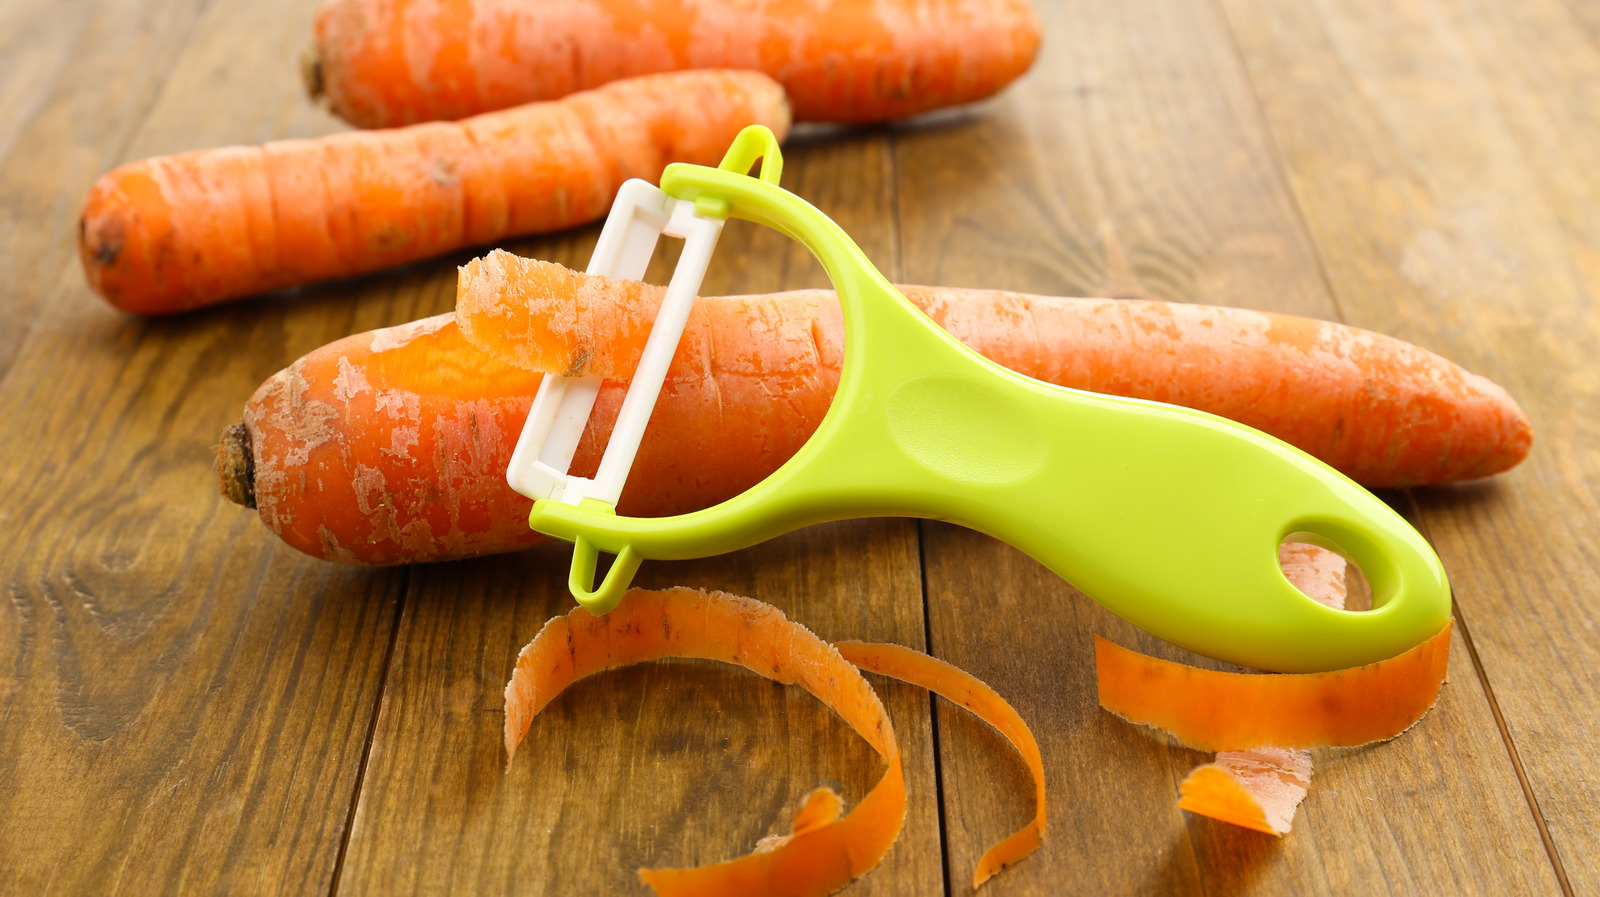 https://www.tastingtable.com/img/gallery/the-absolute-best-uses-for-your-vegetable-peeler/l-intro-1652969903.jpg